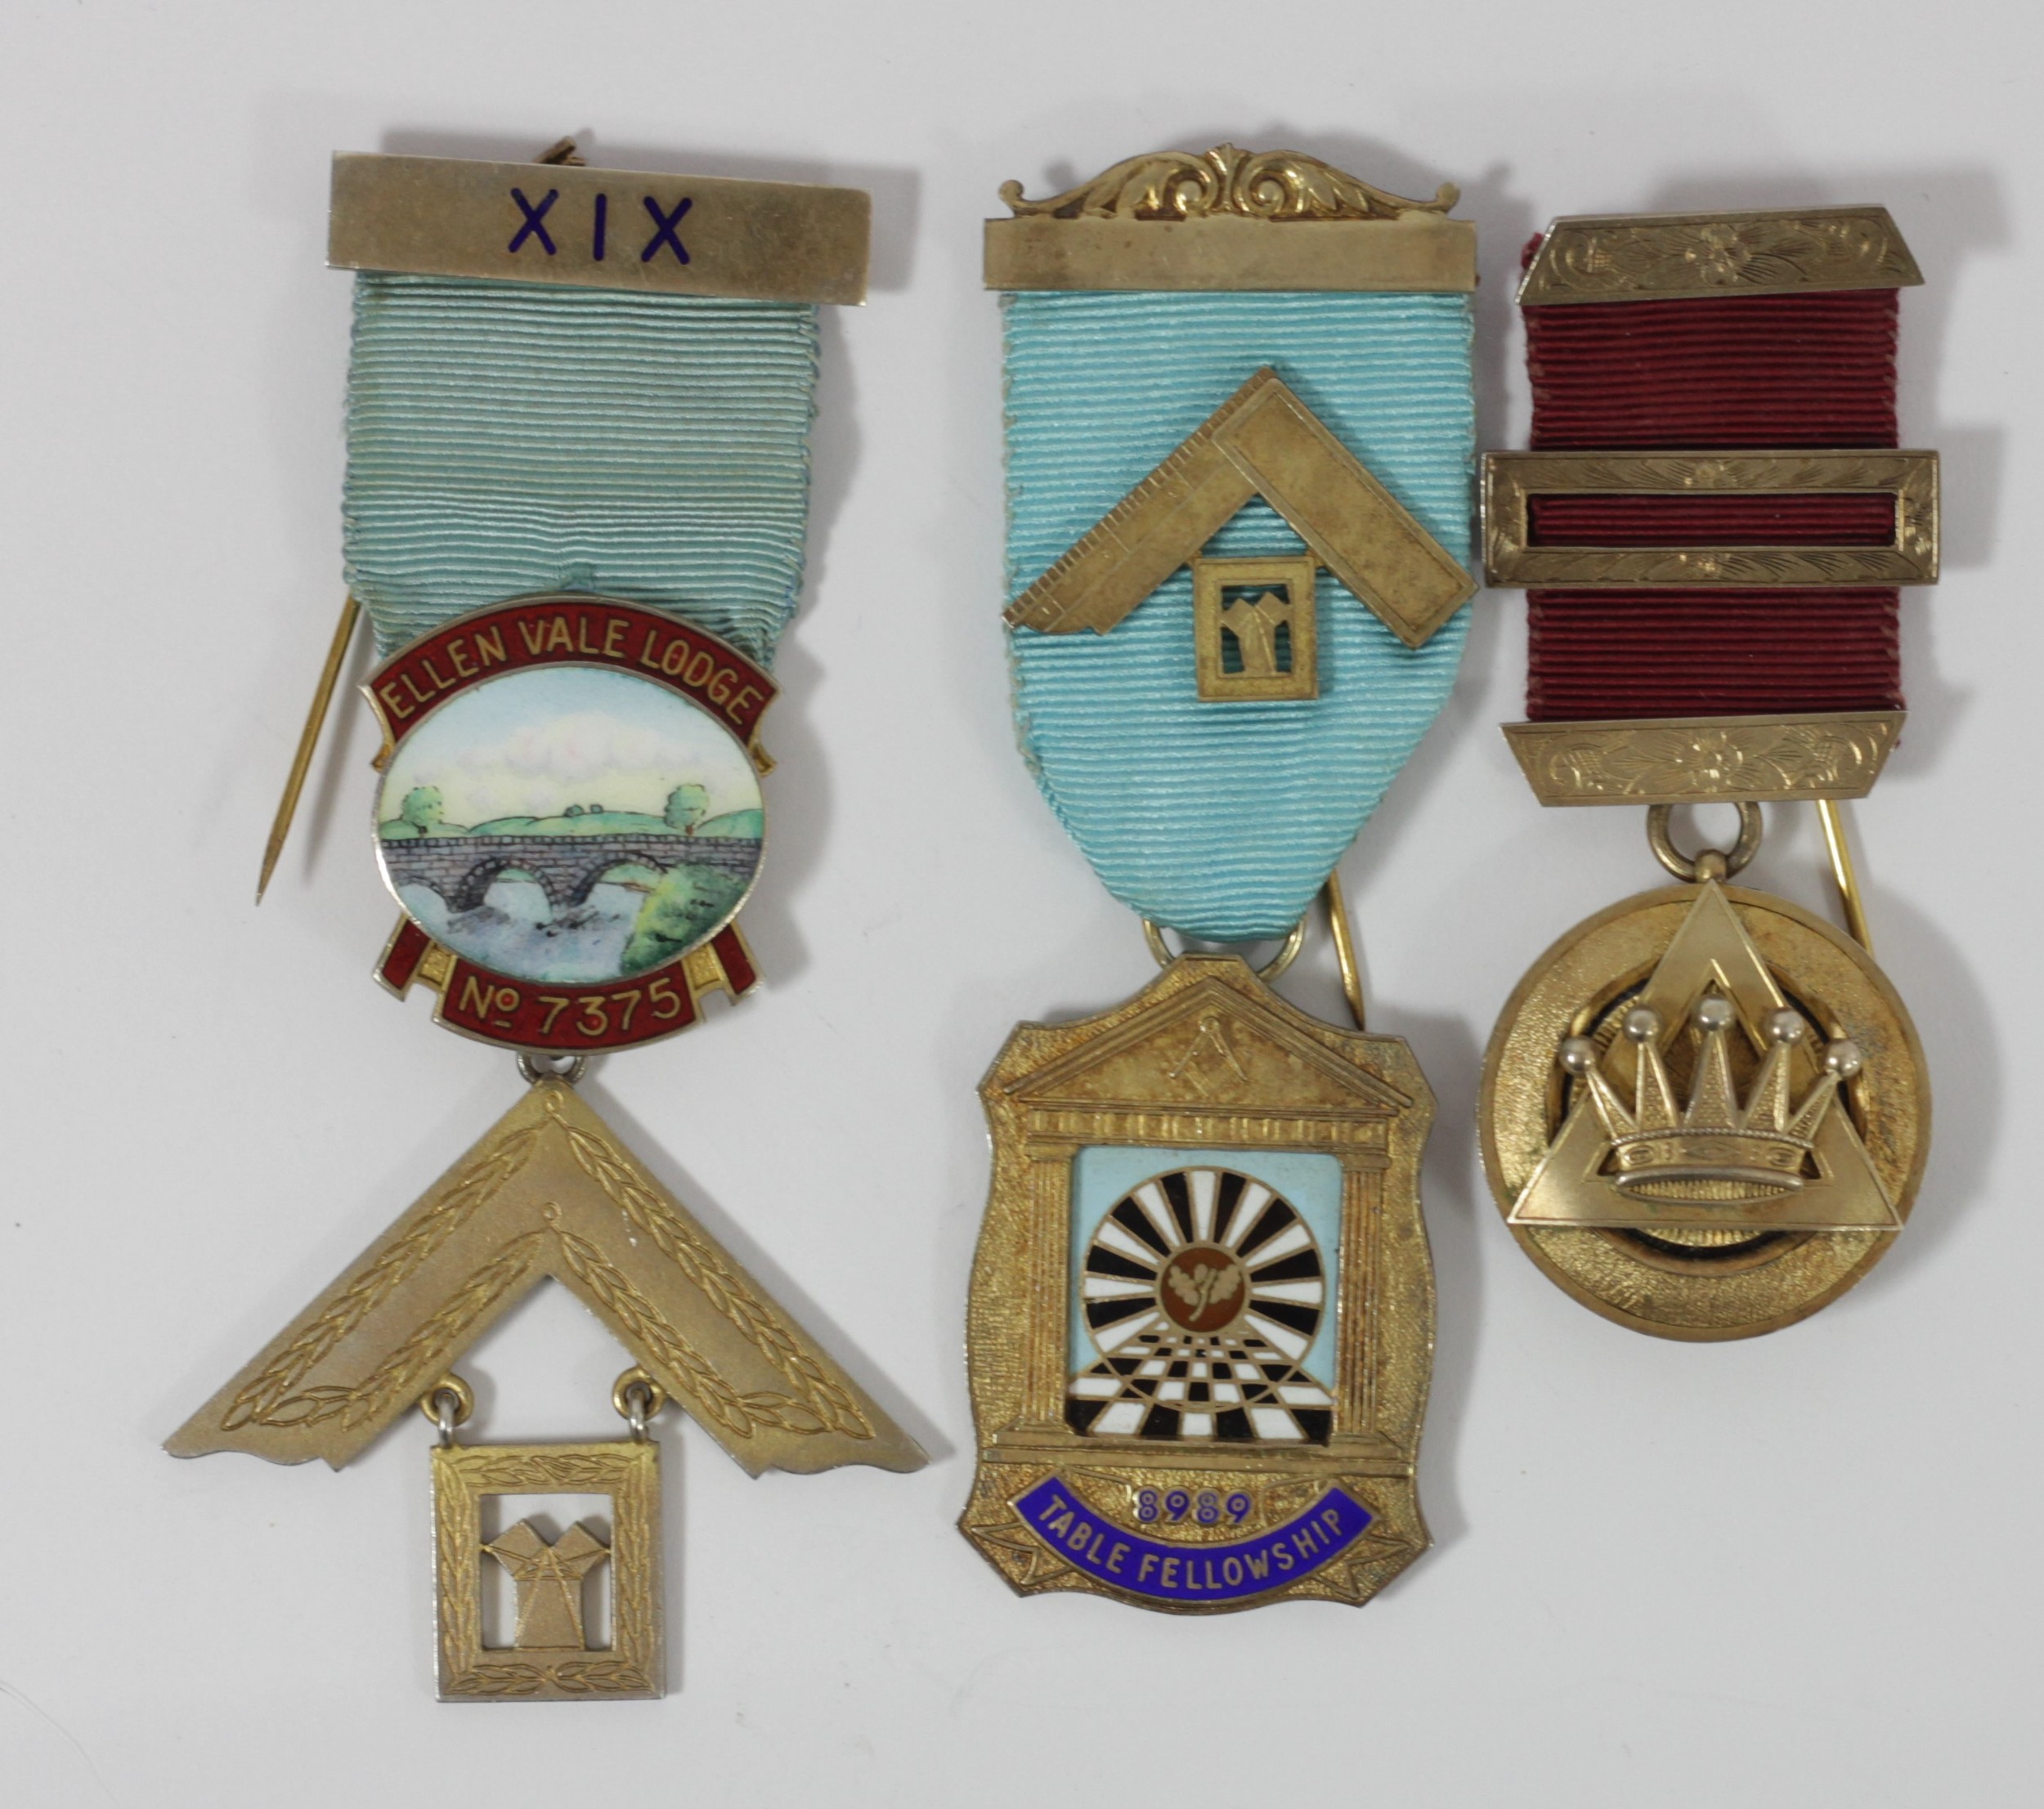 Three silver gilt and enamel Masonic Lodge medals, 87gm, cases,